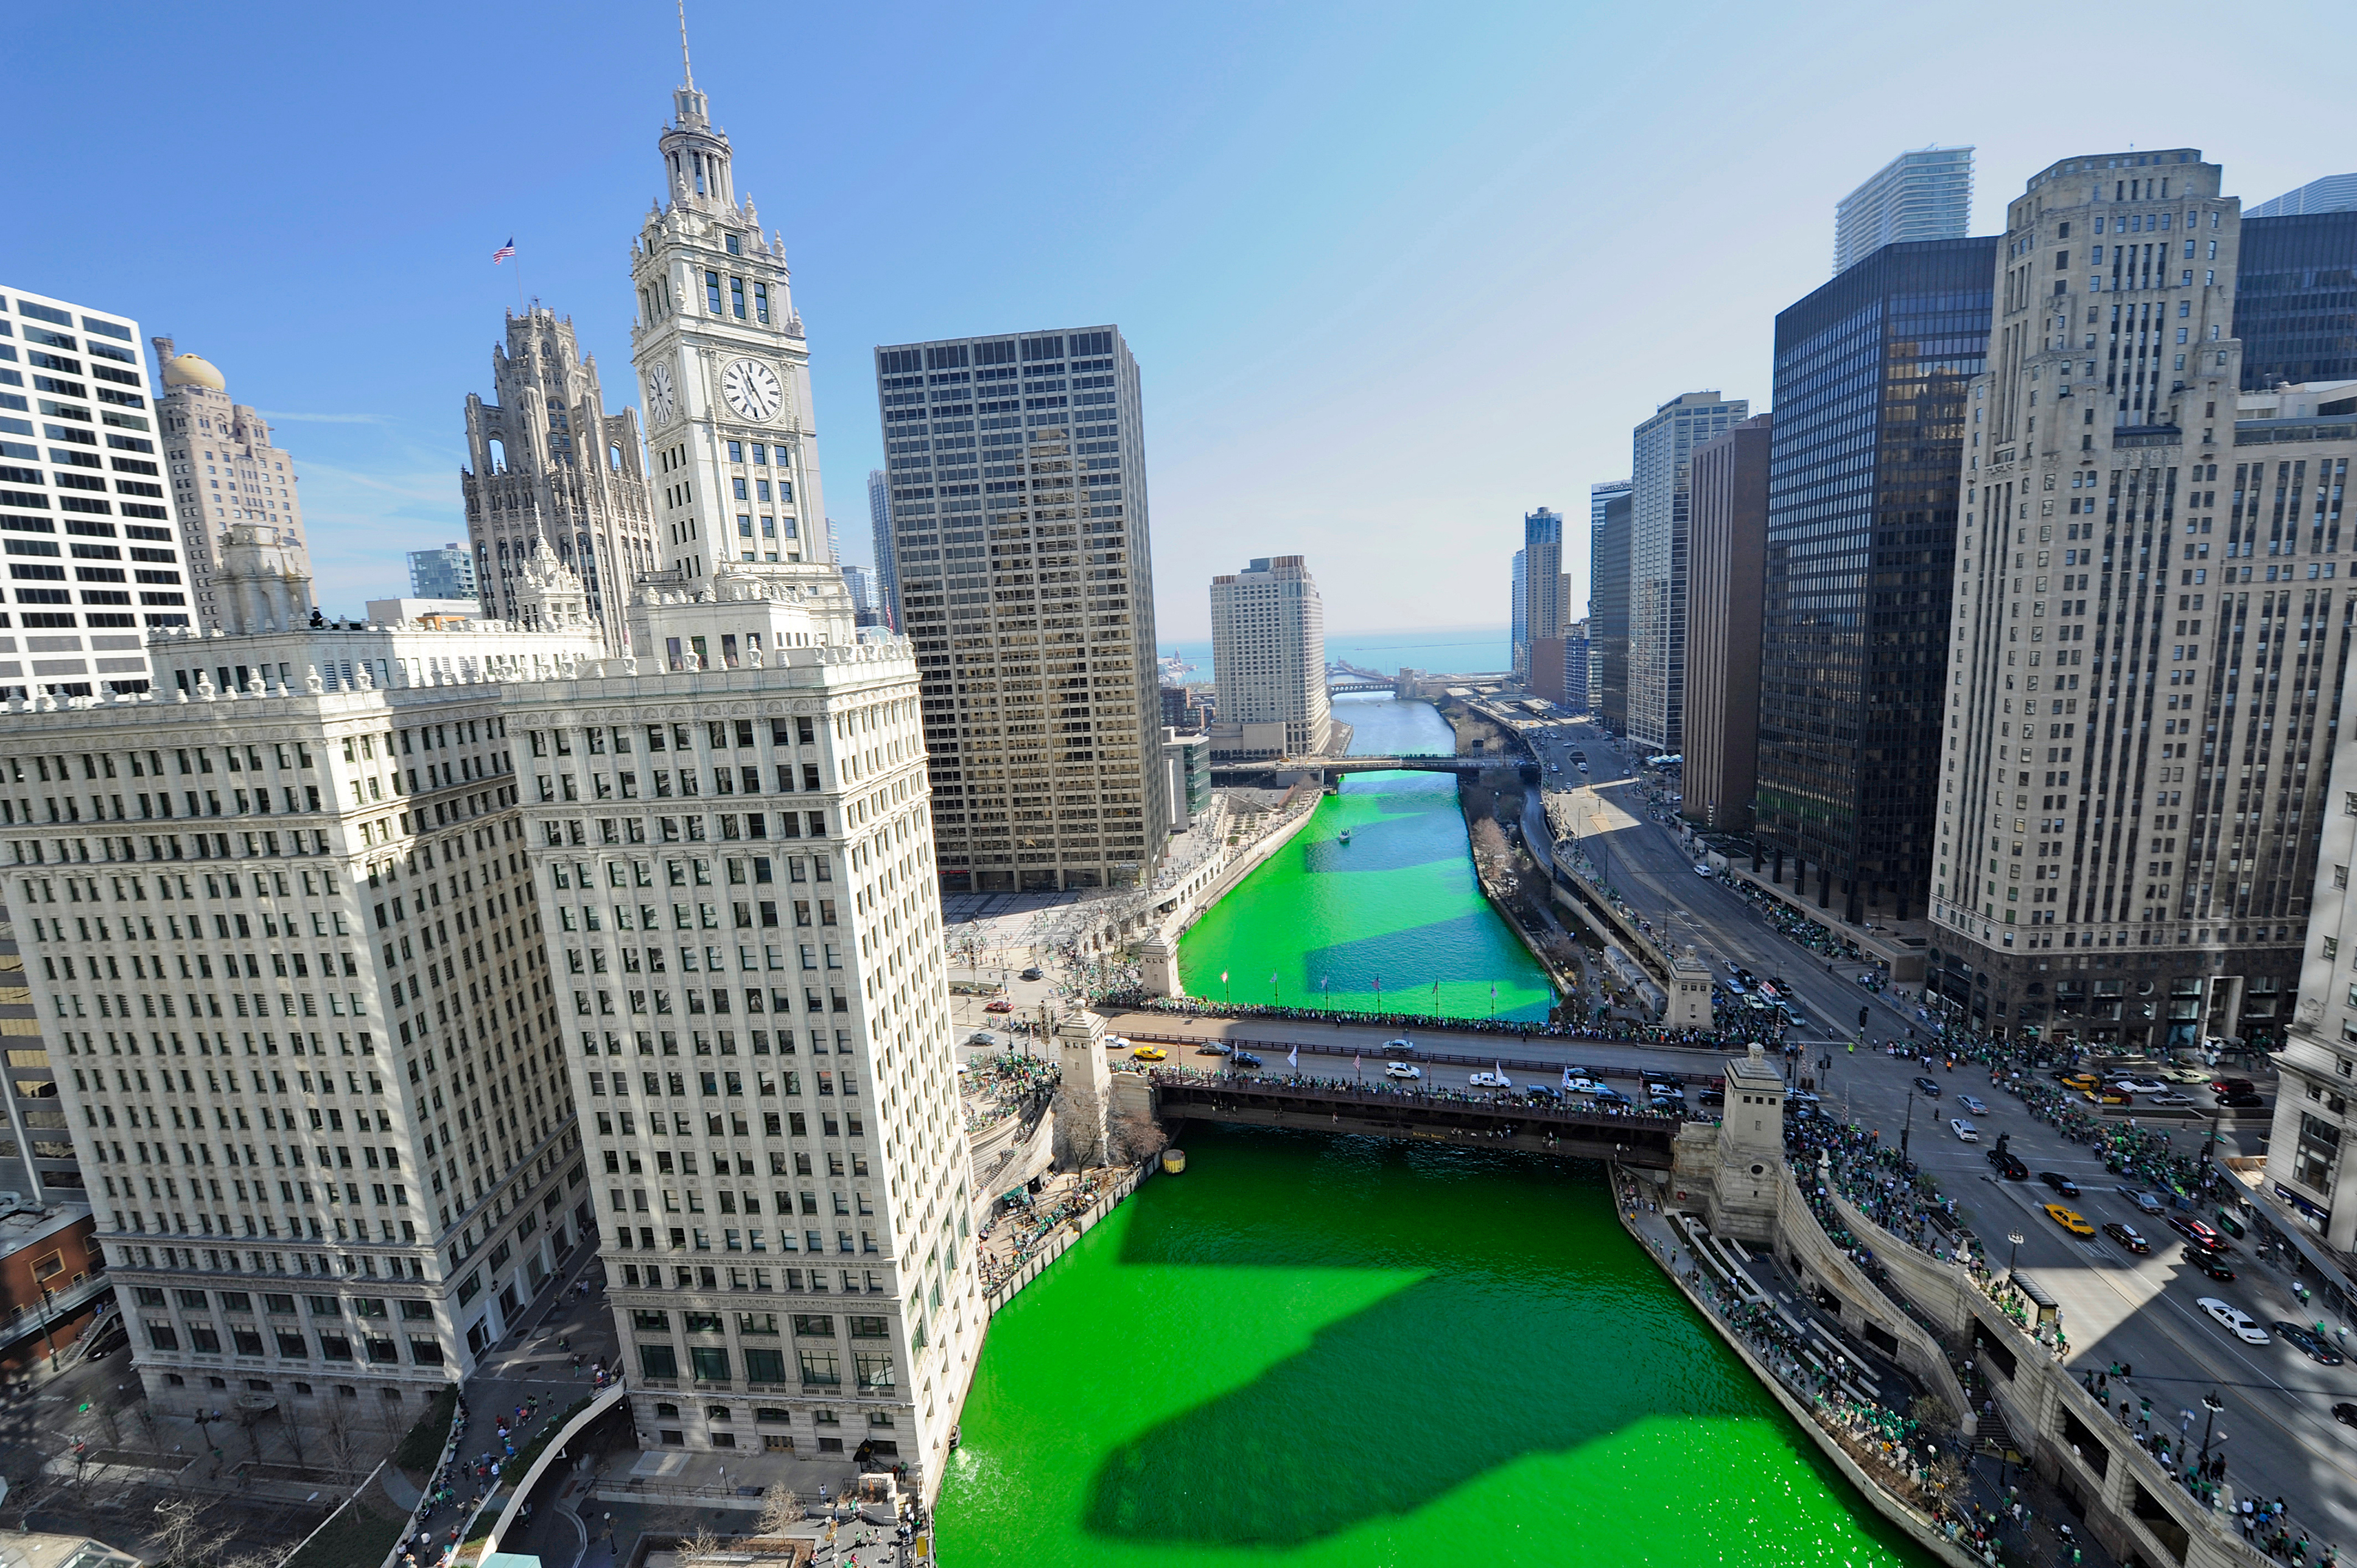 The History of Chicago & the Green River